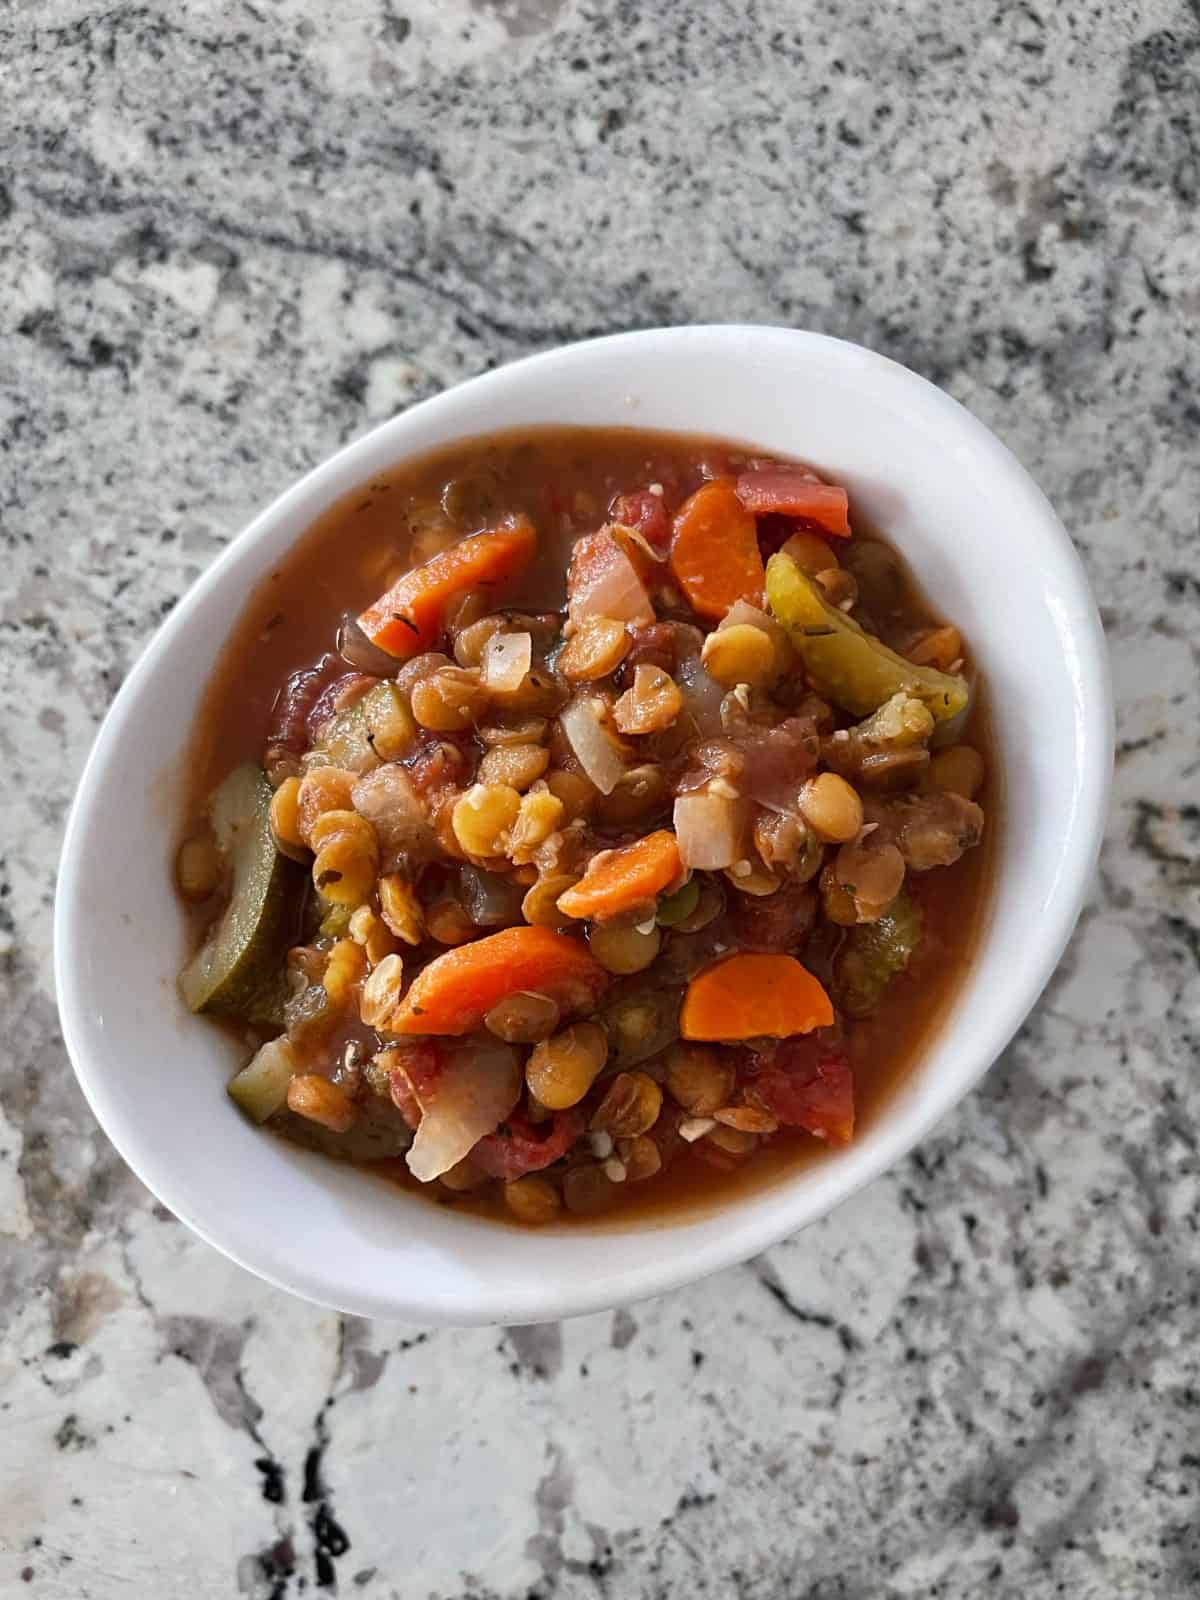 Instant Pot Vegetarian Minestrone with lentils in white bowl on granite.